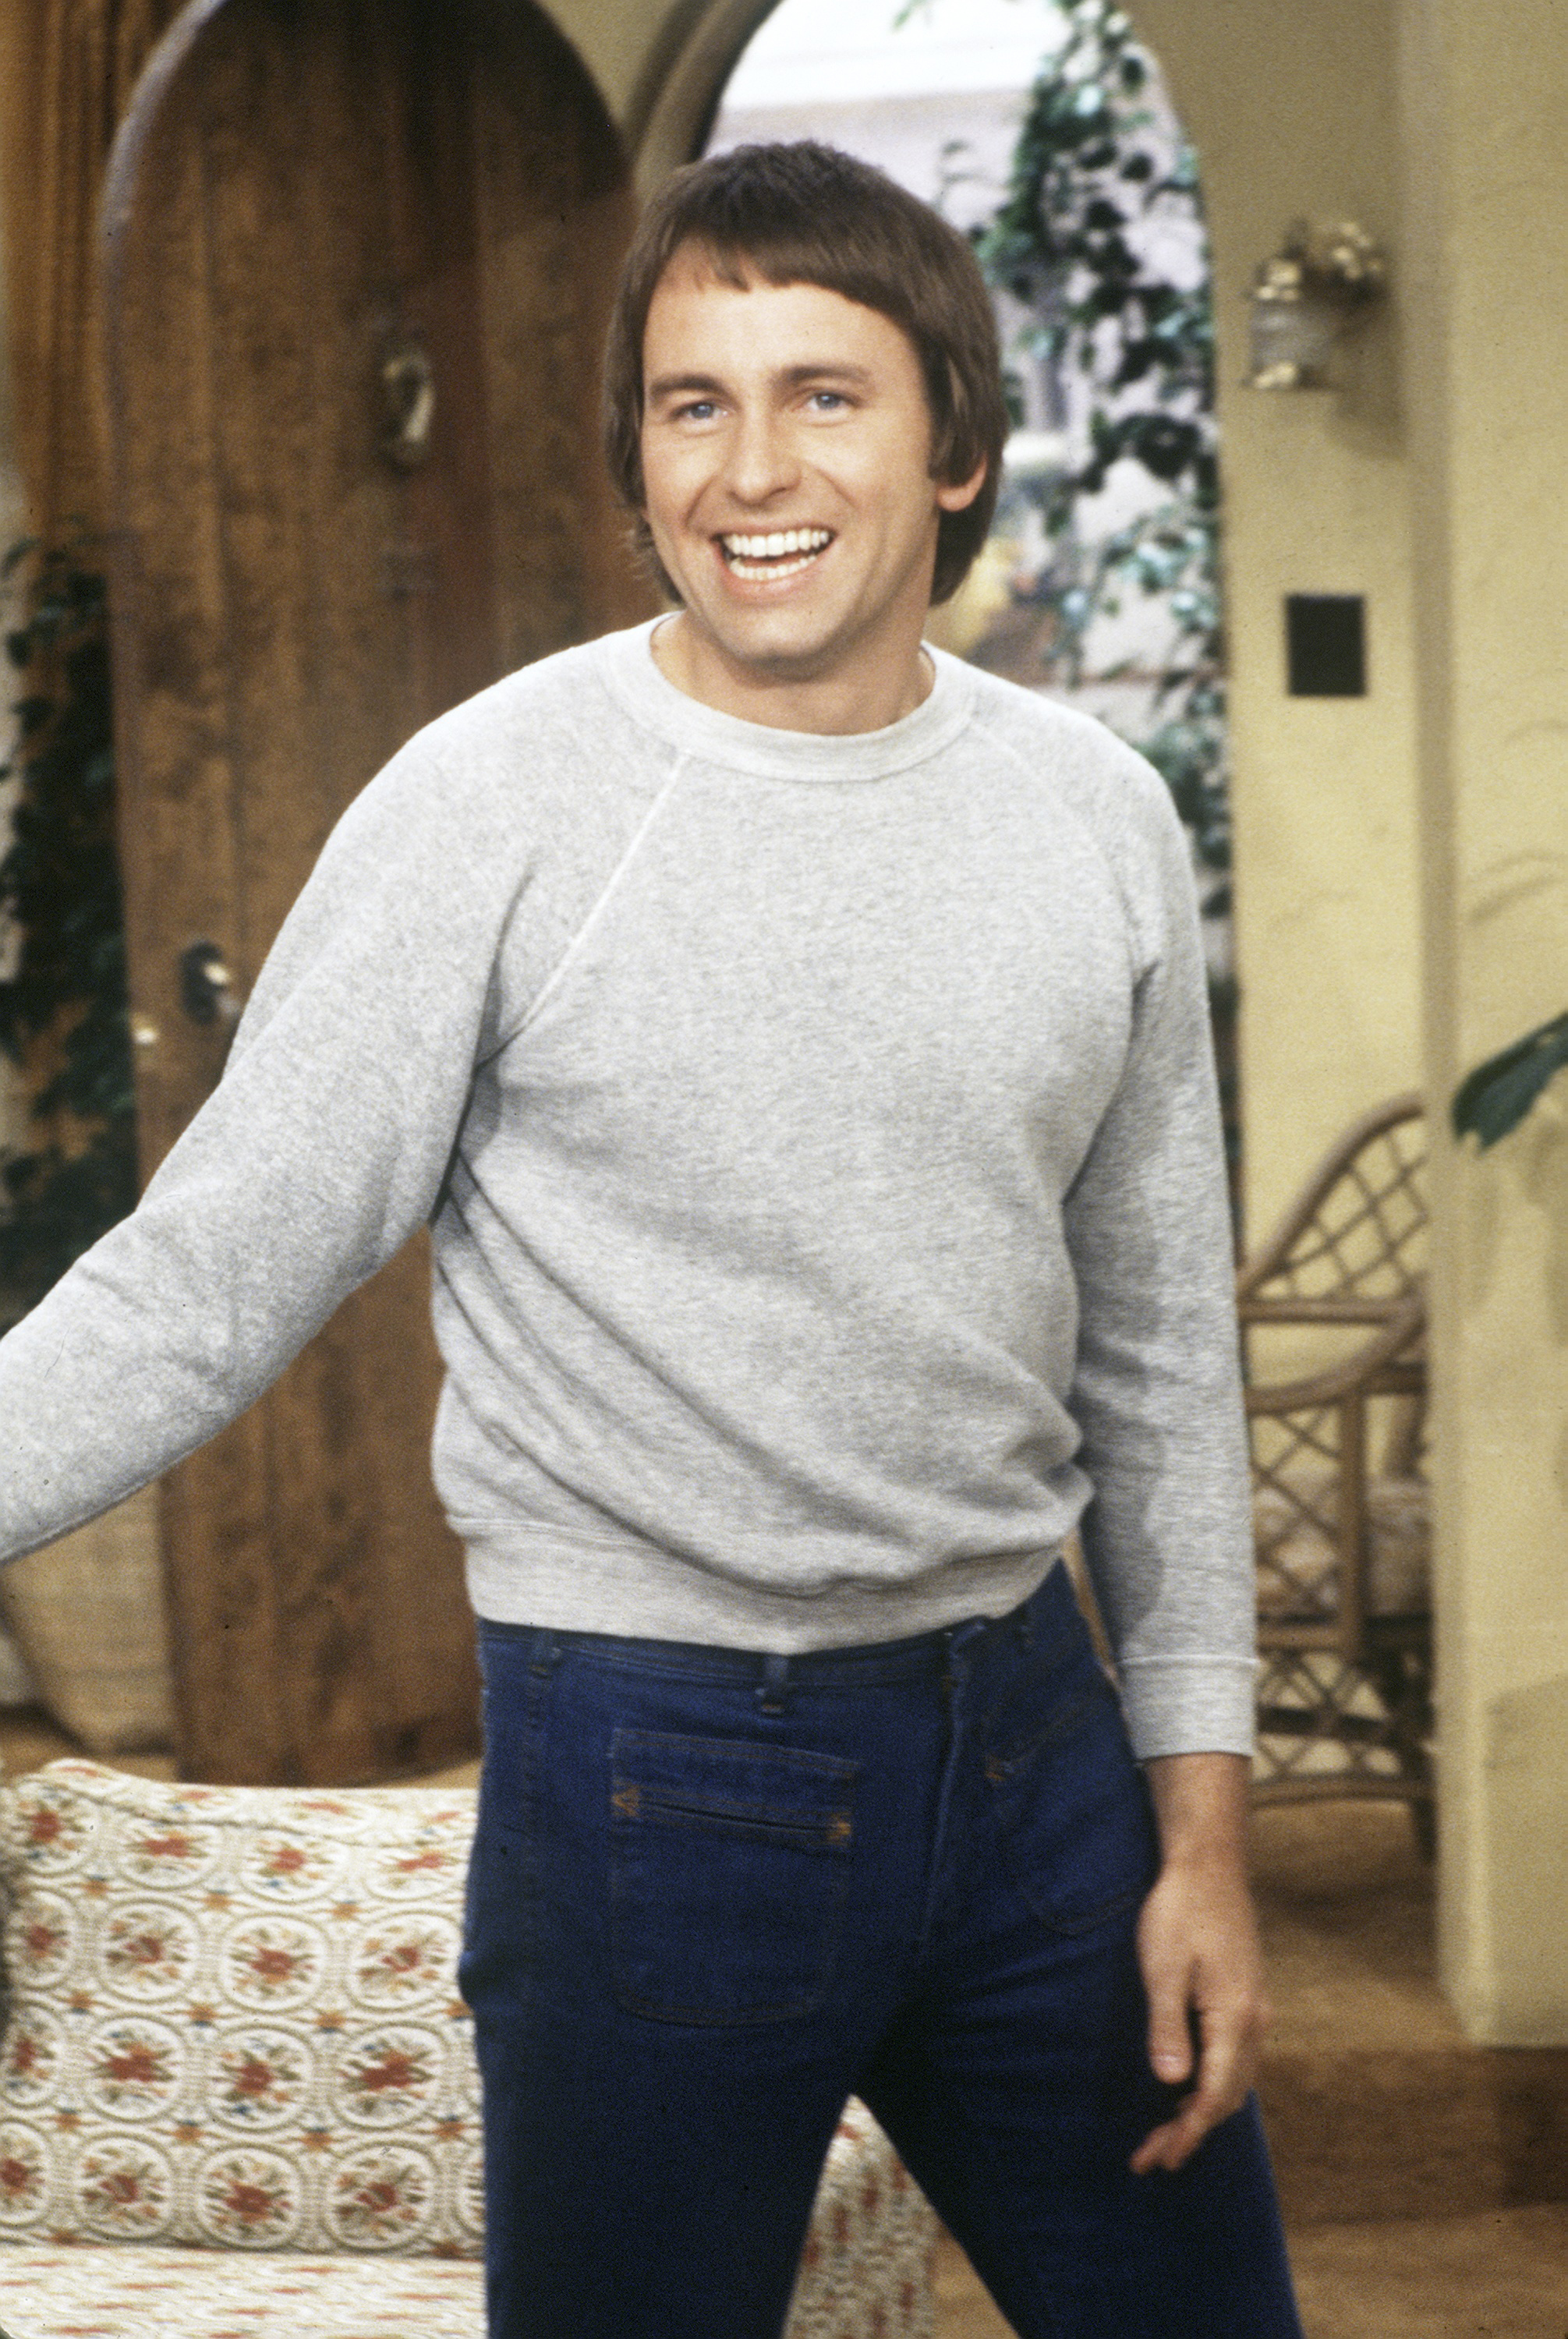 John Ritter on season four of "Three's Company" on September 11, 1979 | Source: Getty Images